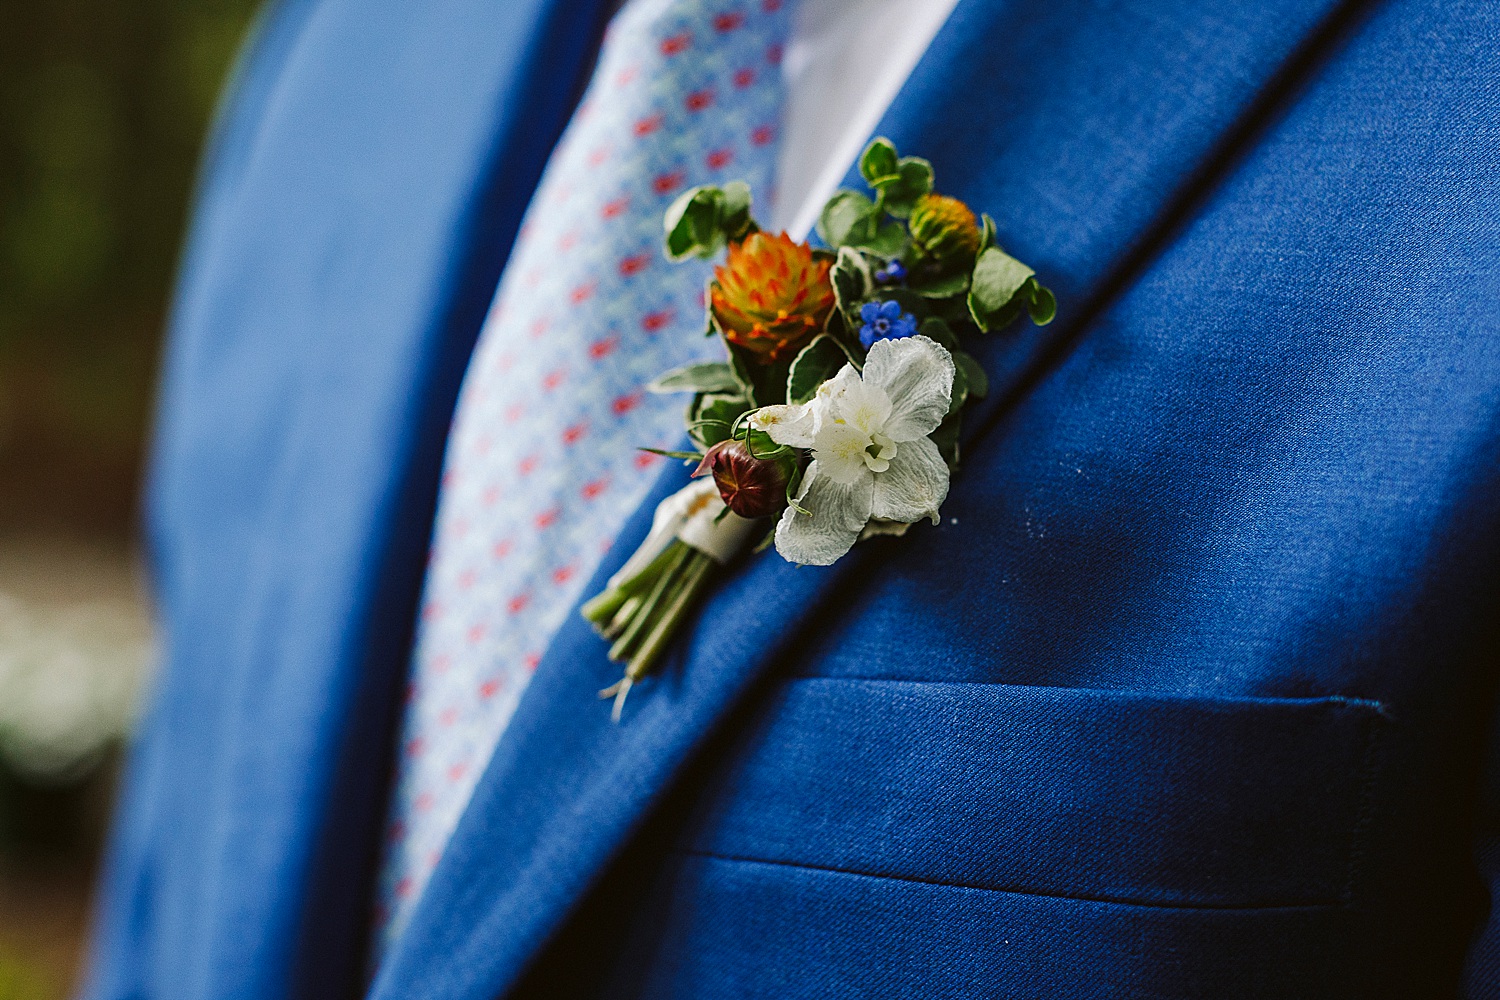 groom's boutonniere